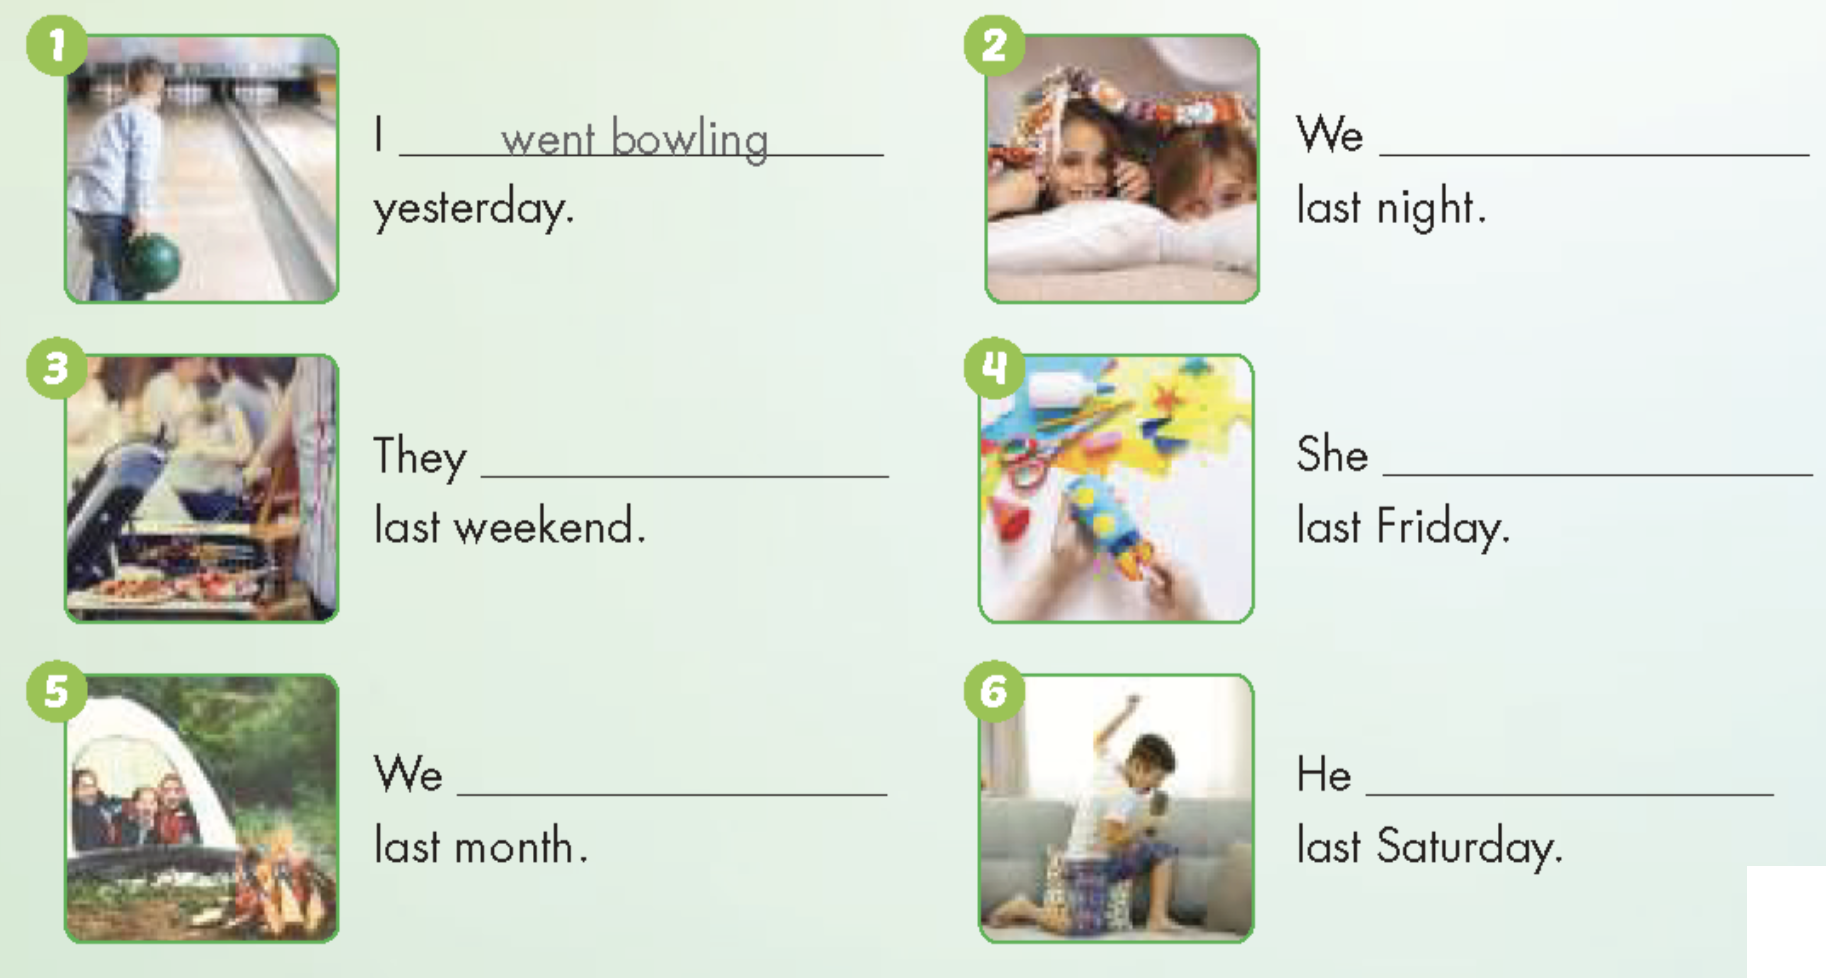 Tiếng Anh lớp 5 Unit 3: My friends and I - ilearn Smart Start (ảnh 31)